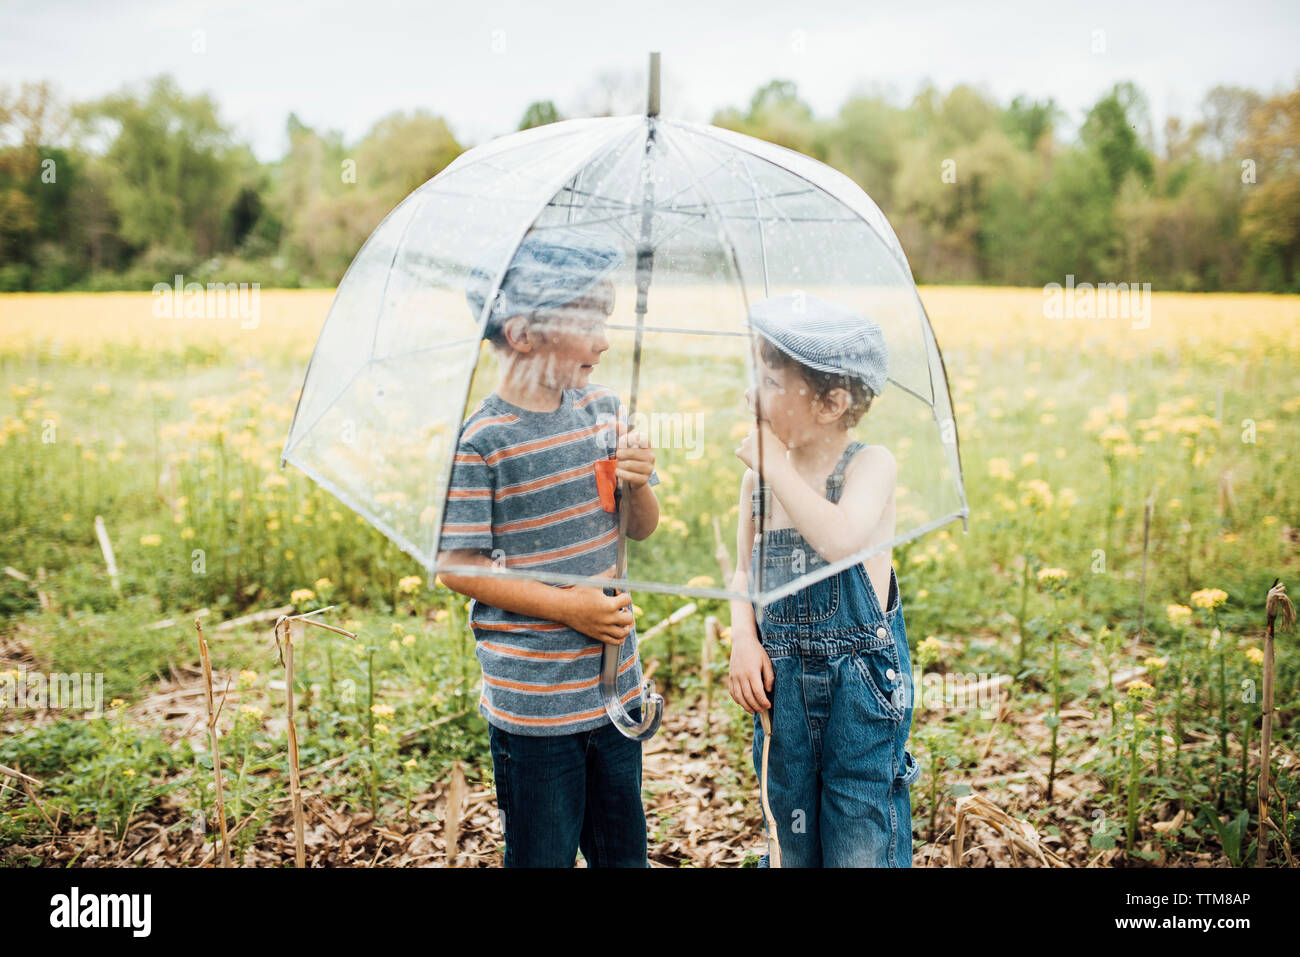 Boys talking while standing under umbrella on field Stock Photo